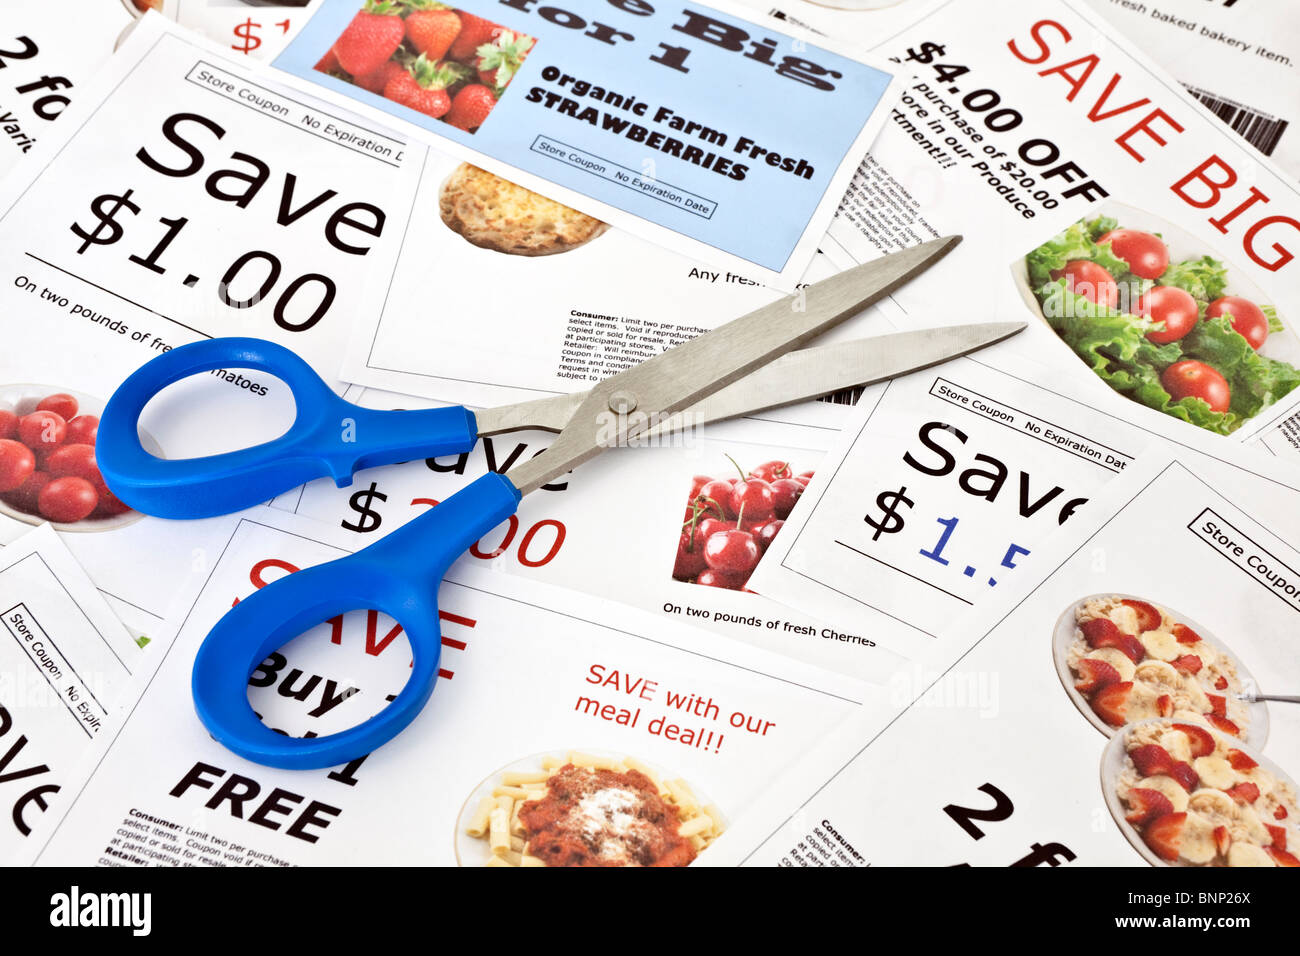 Fake coupon background with Scissors. All coupons were created by the photographer. Images in the coupons are the photographers Stock Photo